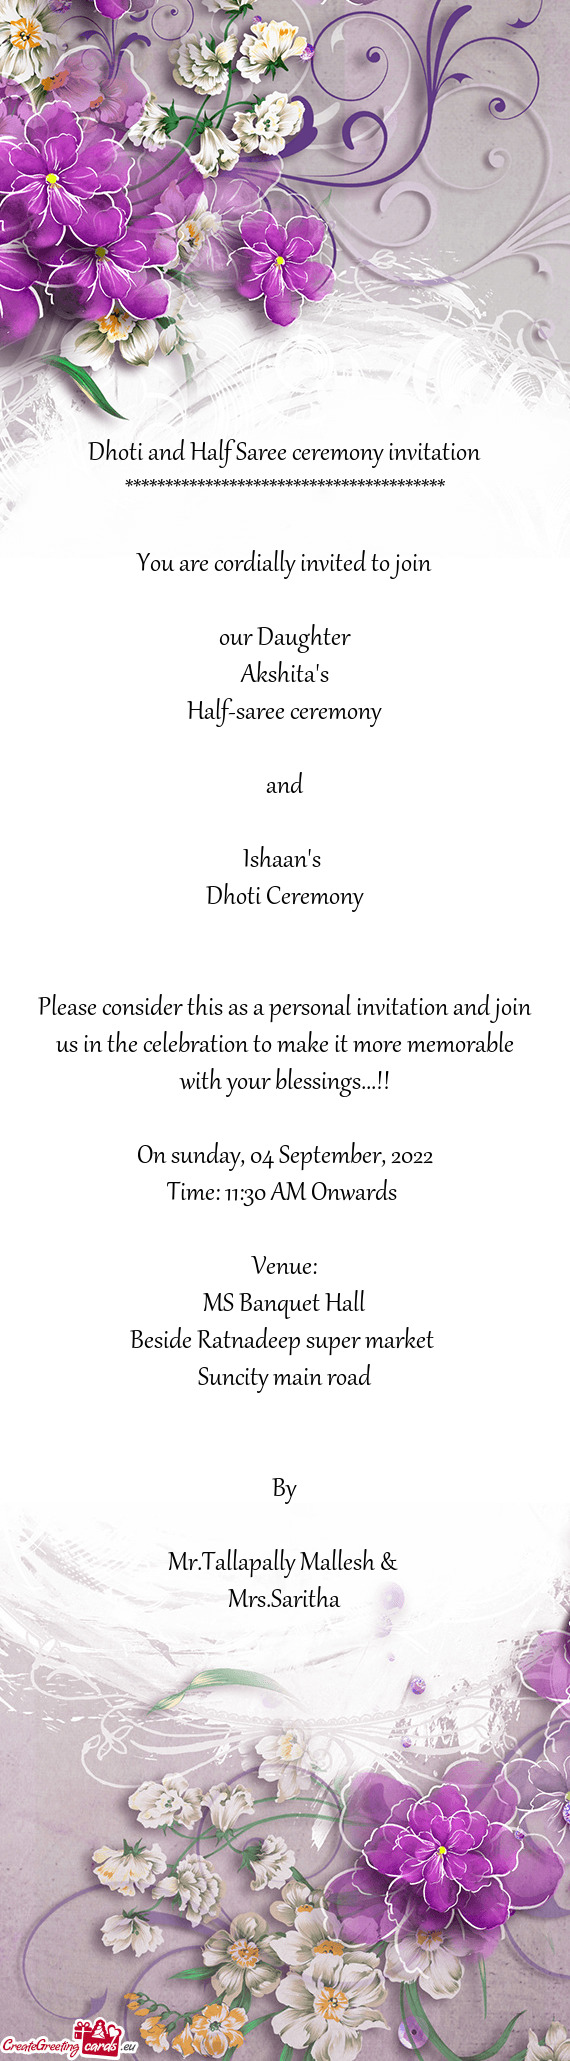 You are cordially invited to join